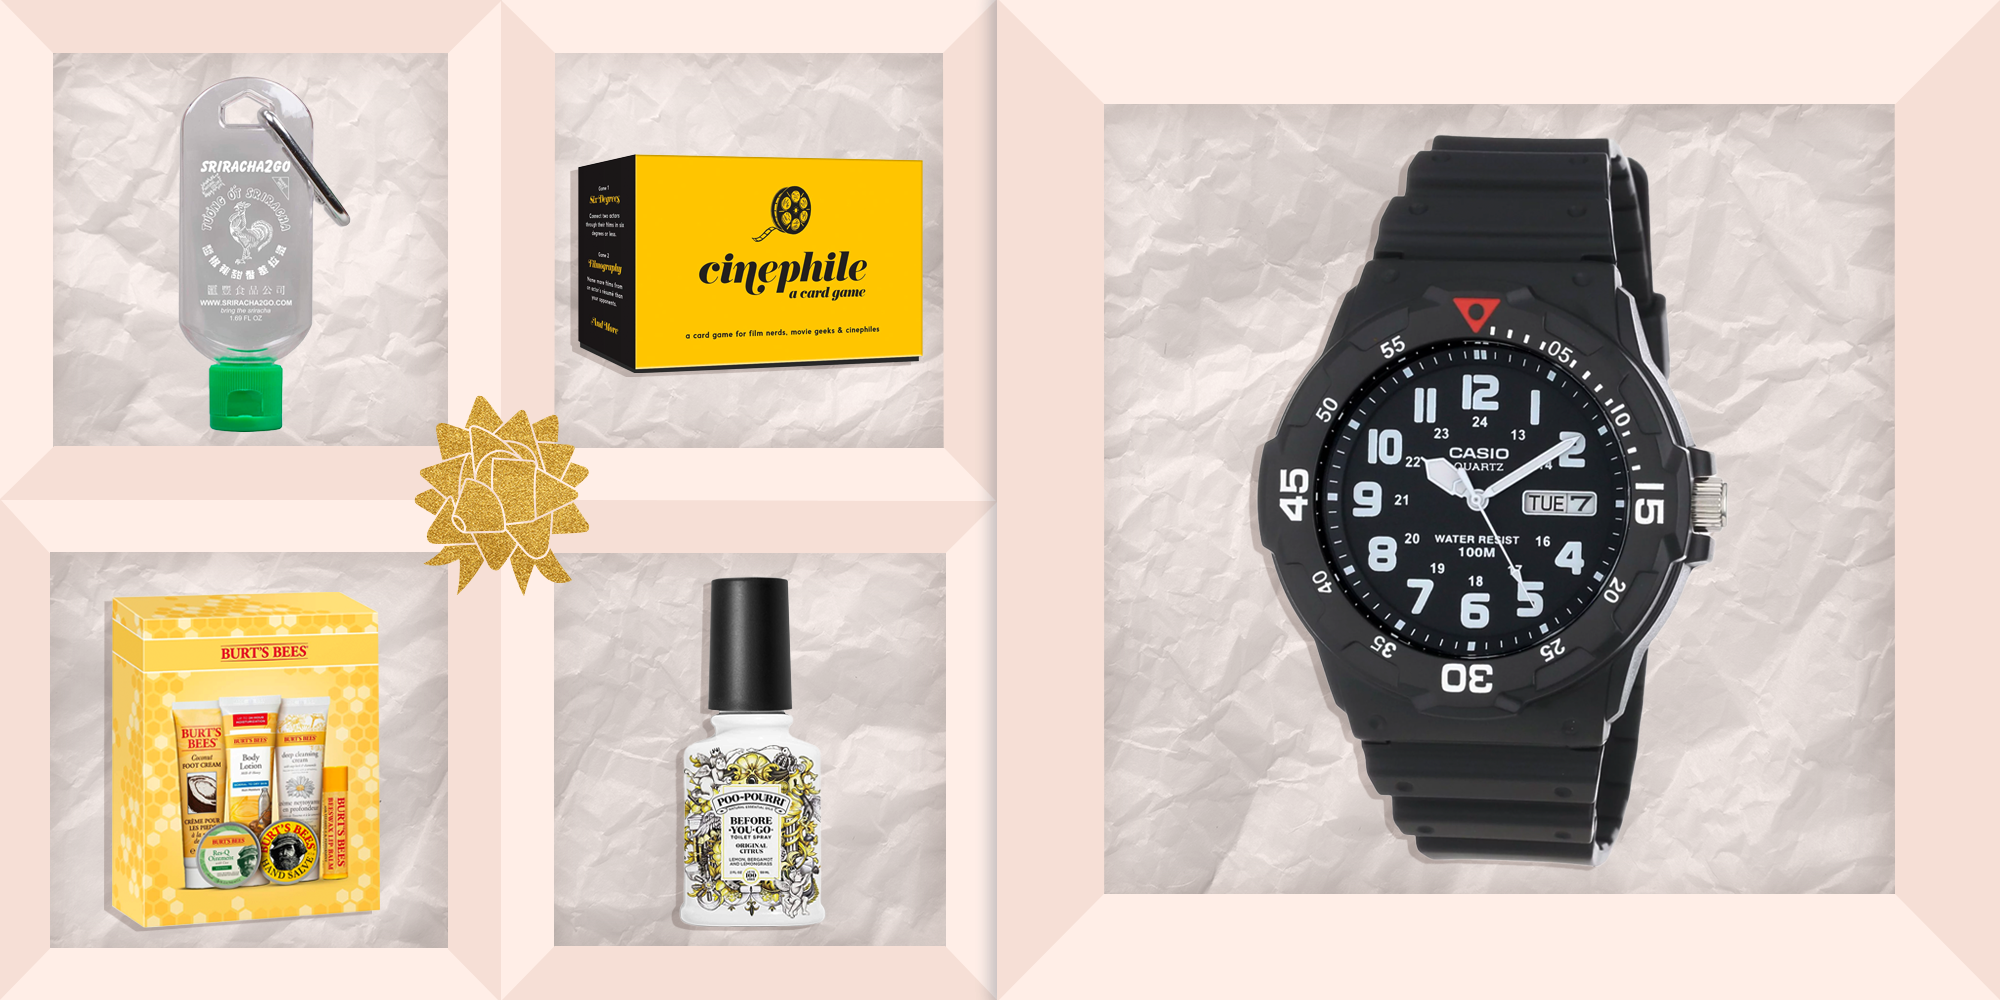 10 Best Secret Santa Gift Ideas under Rs500 For Him and Her   Vanitynoapologies  Indian Makeup and Beauty Blog